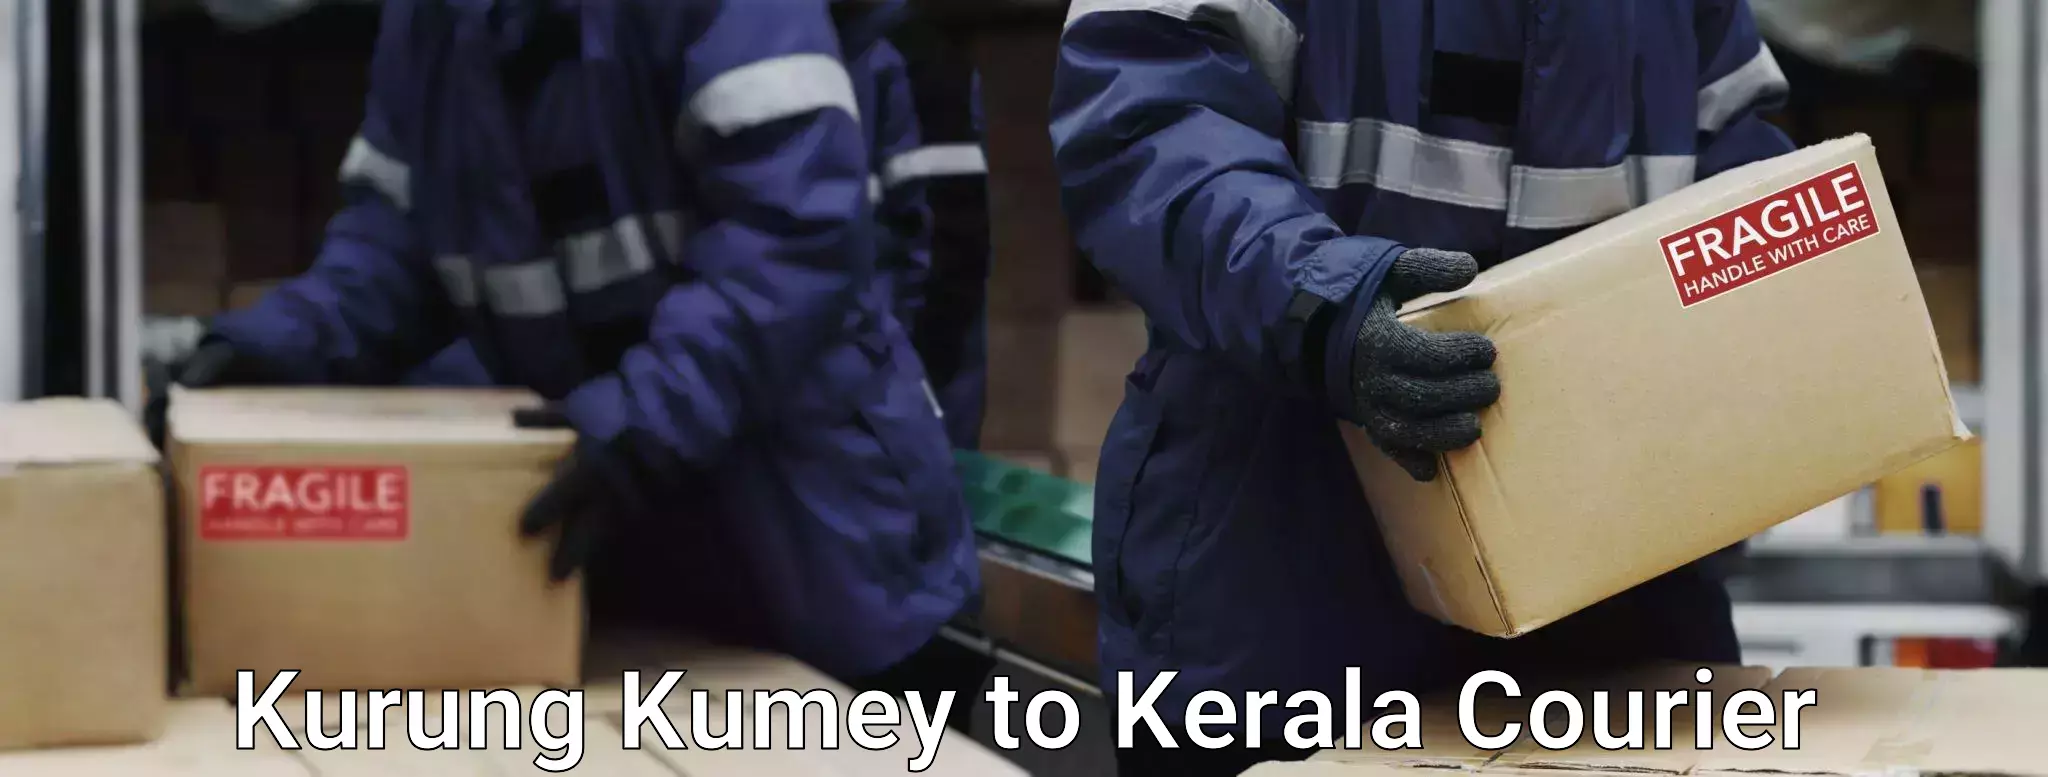 Expedited baggage courier Kurung Kumey to Cochin University of Science and Technology